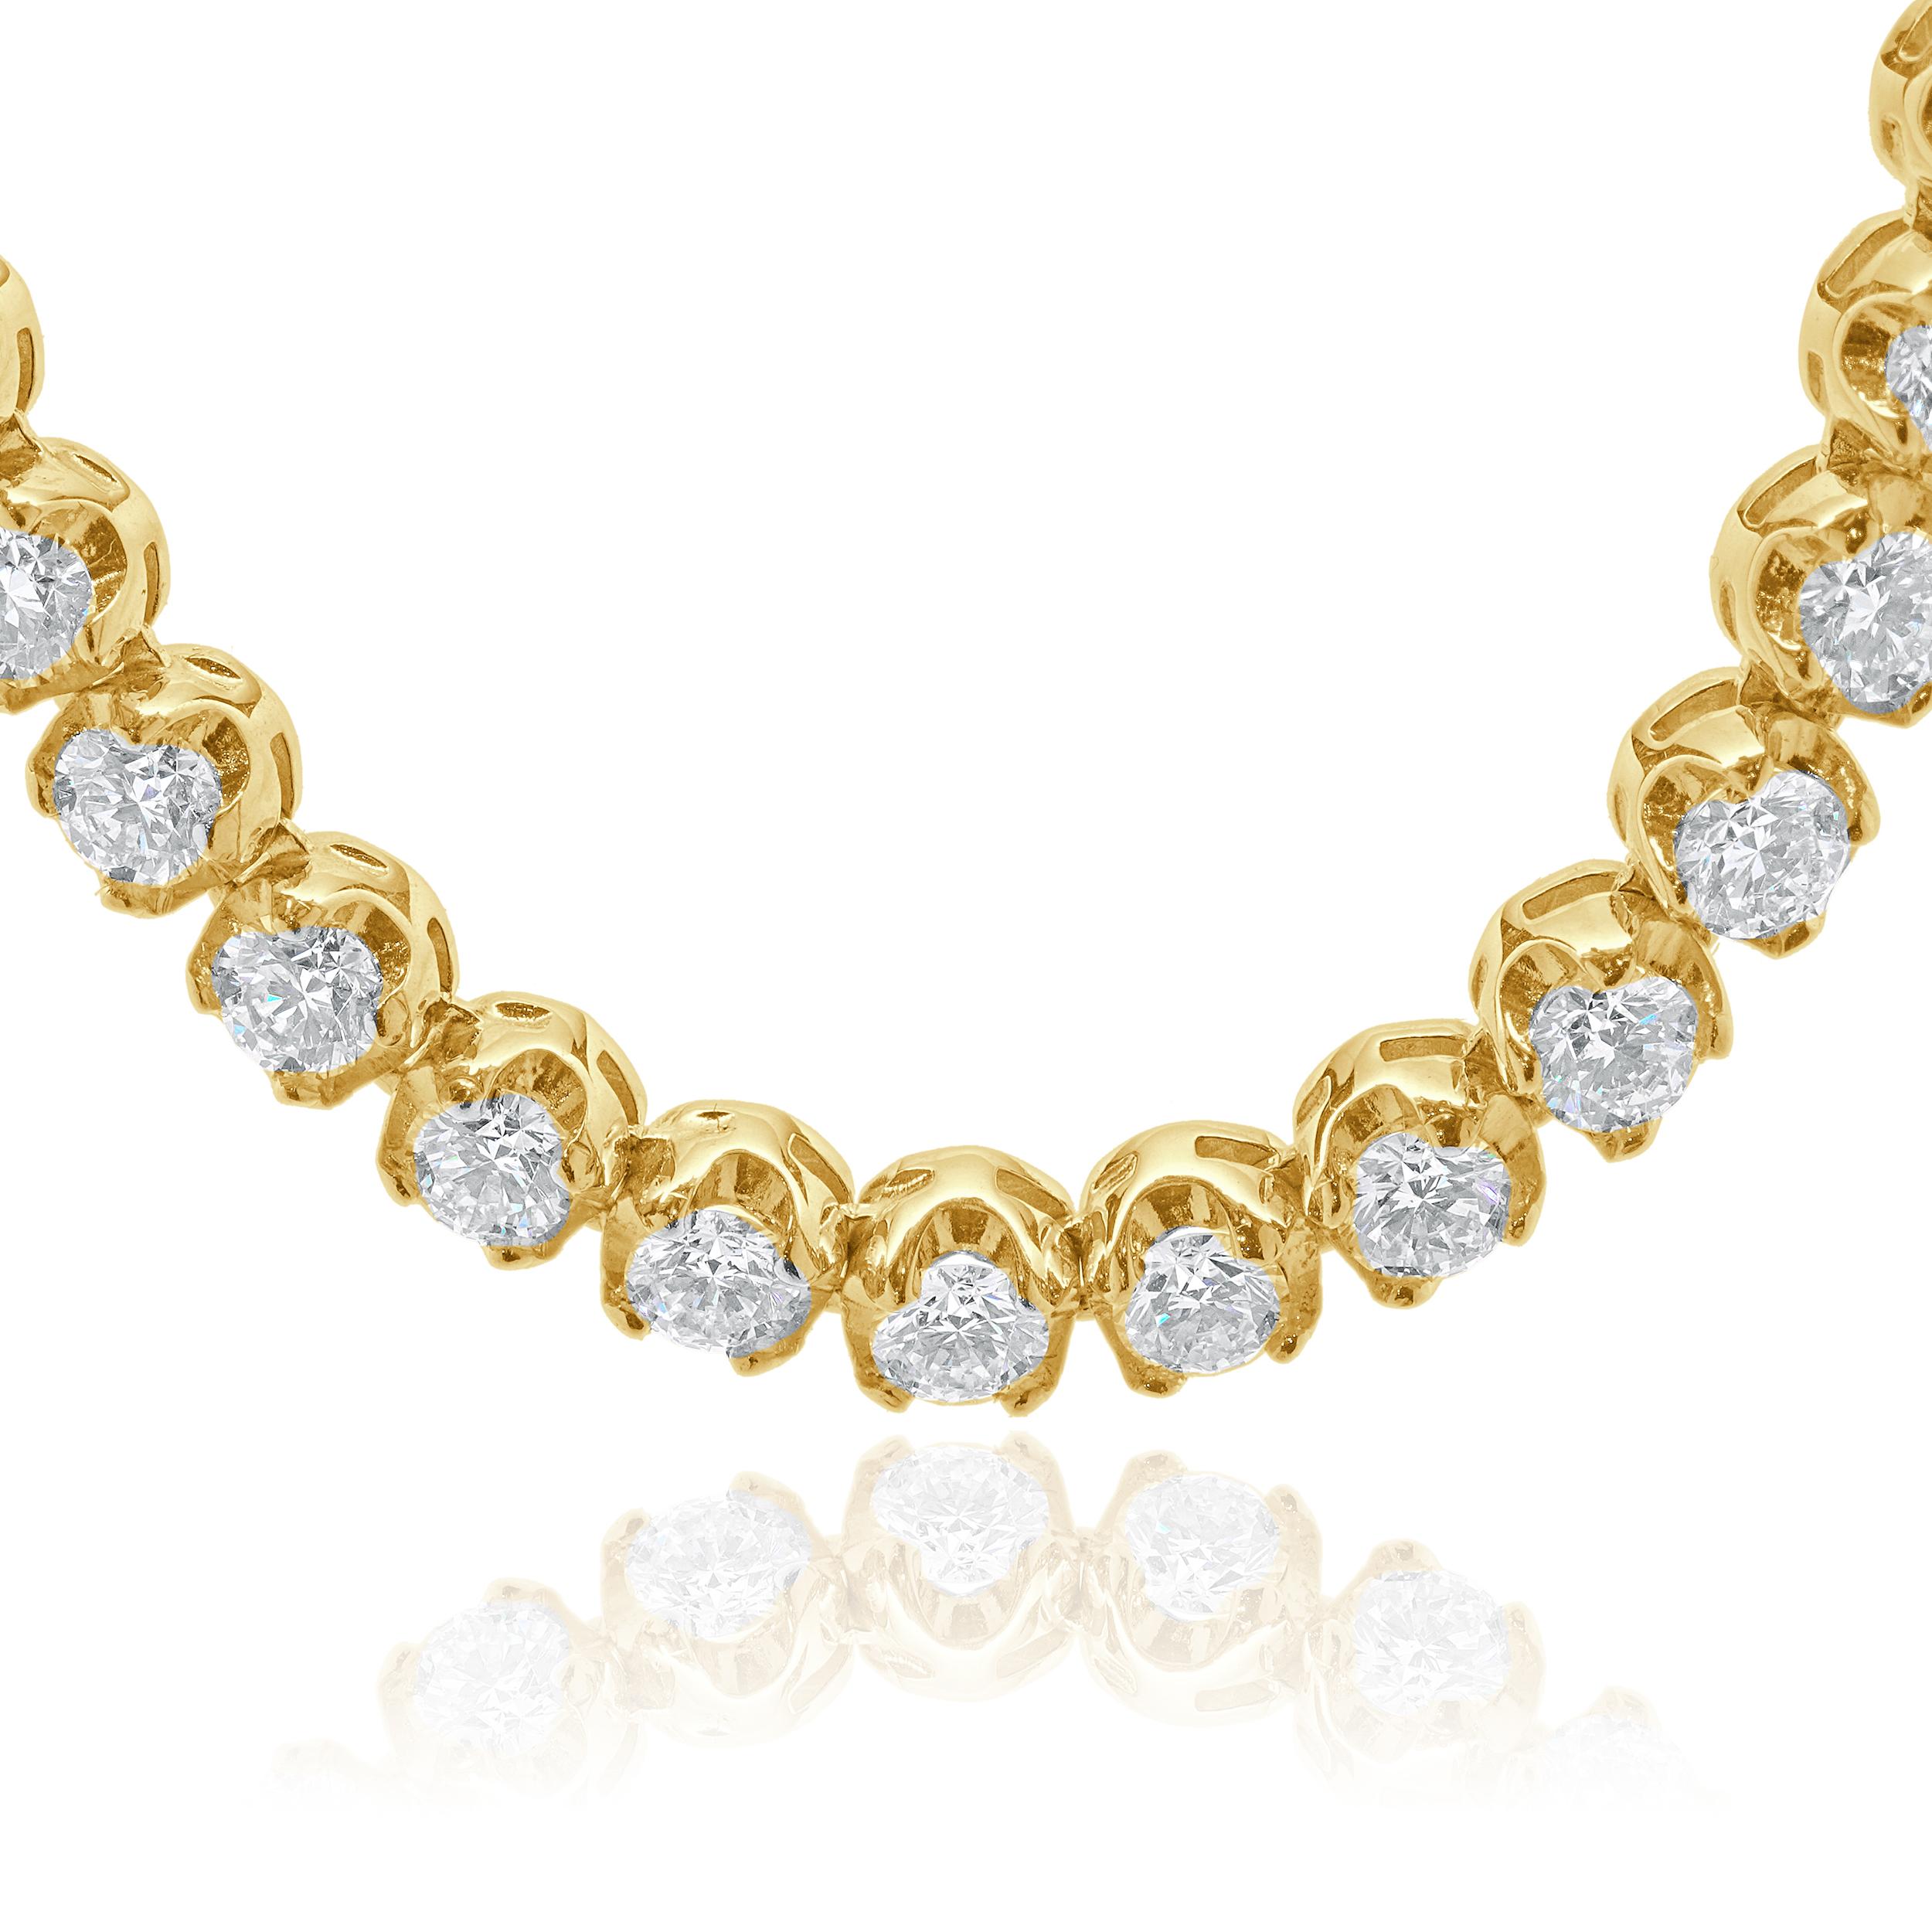 14k Yellow Gold Diamond Tennis Necklace In Excellent Condition For Sale In Scottsdale, AZ